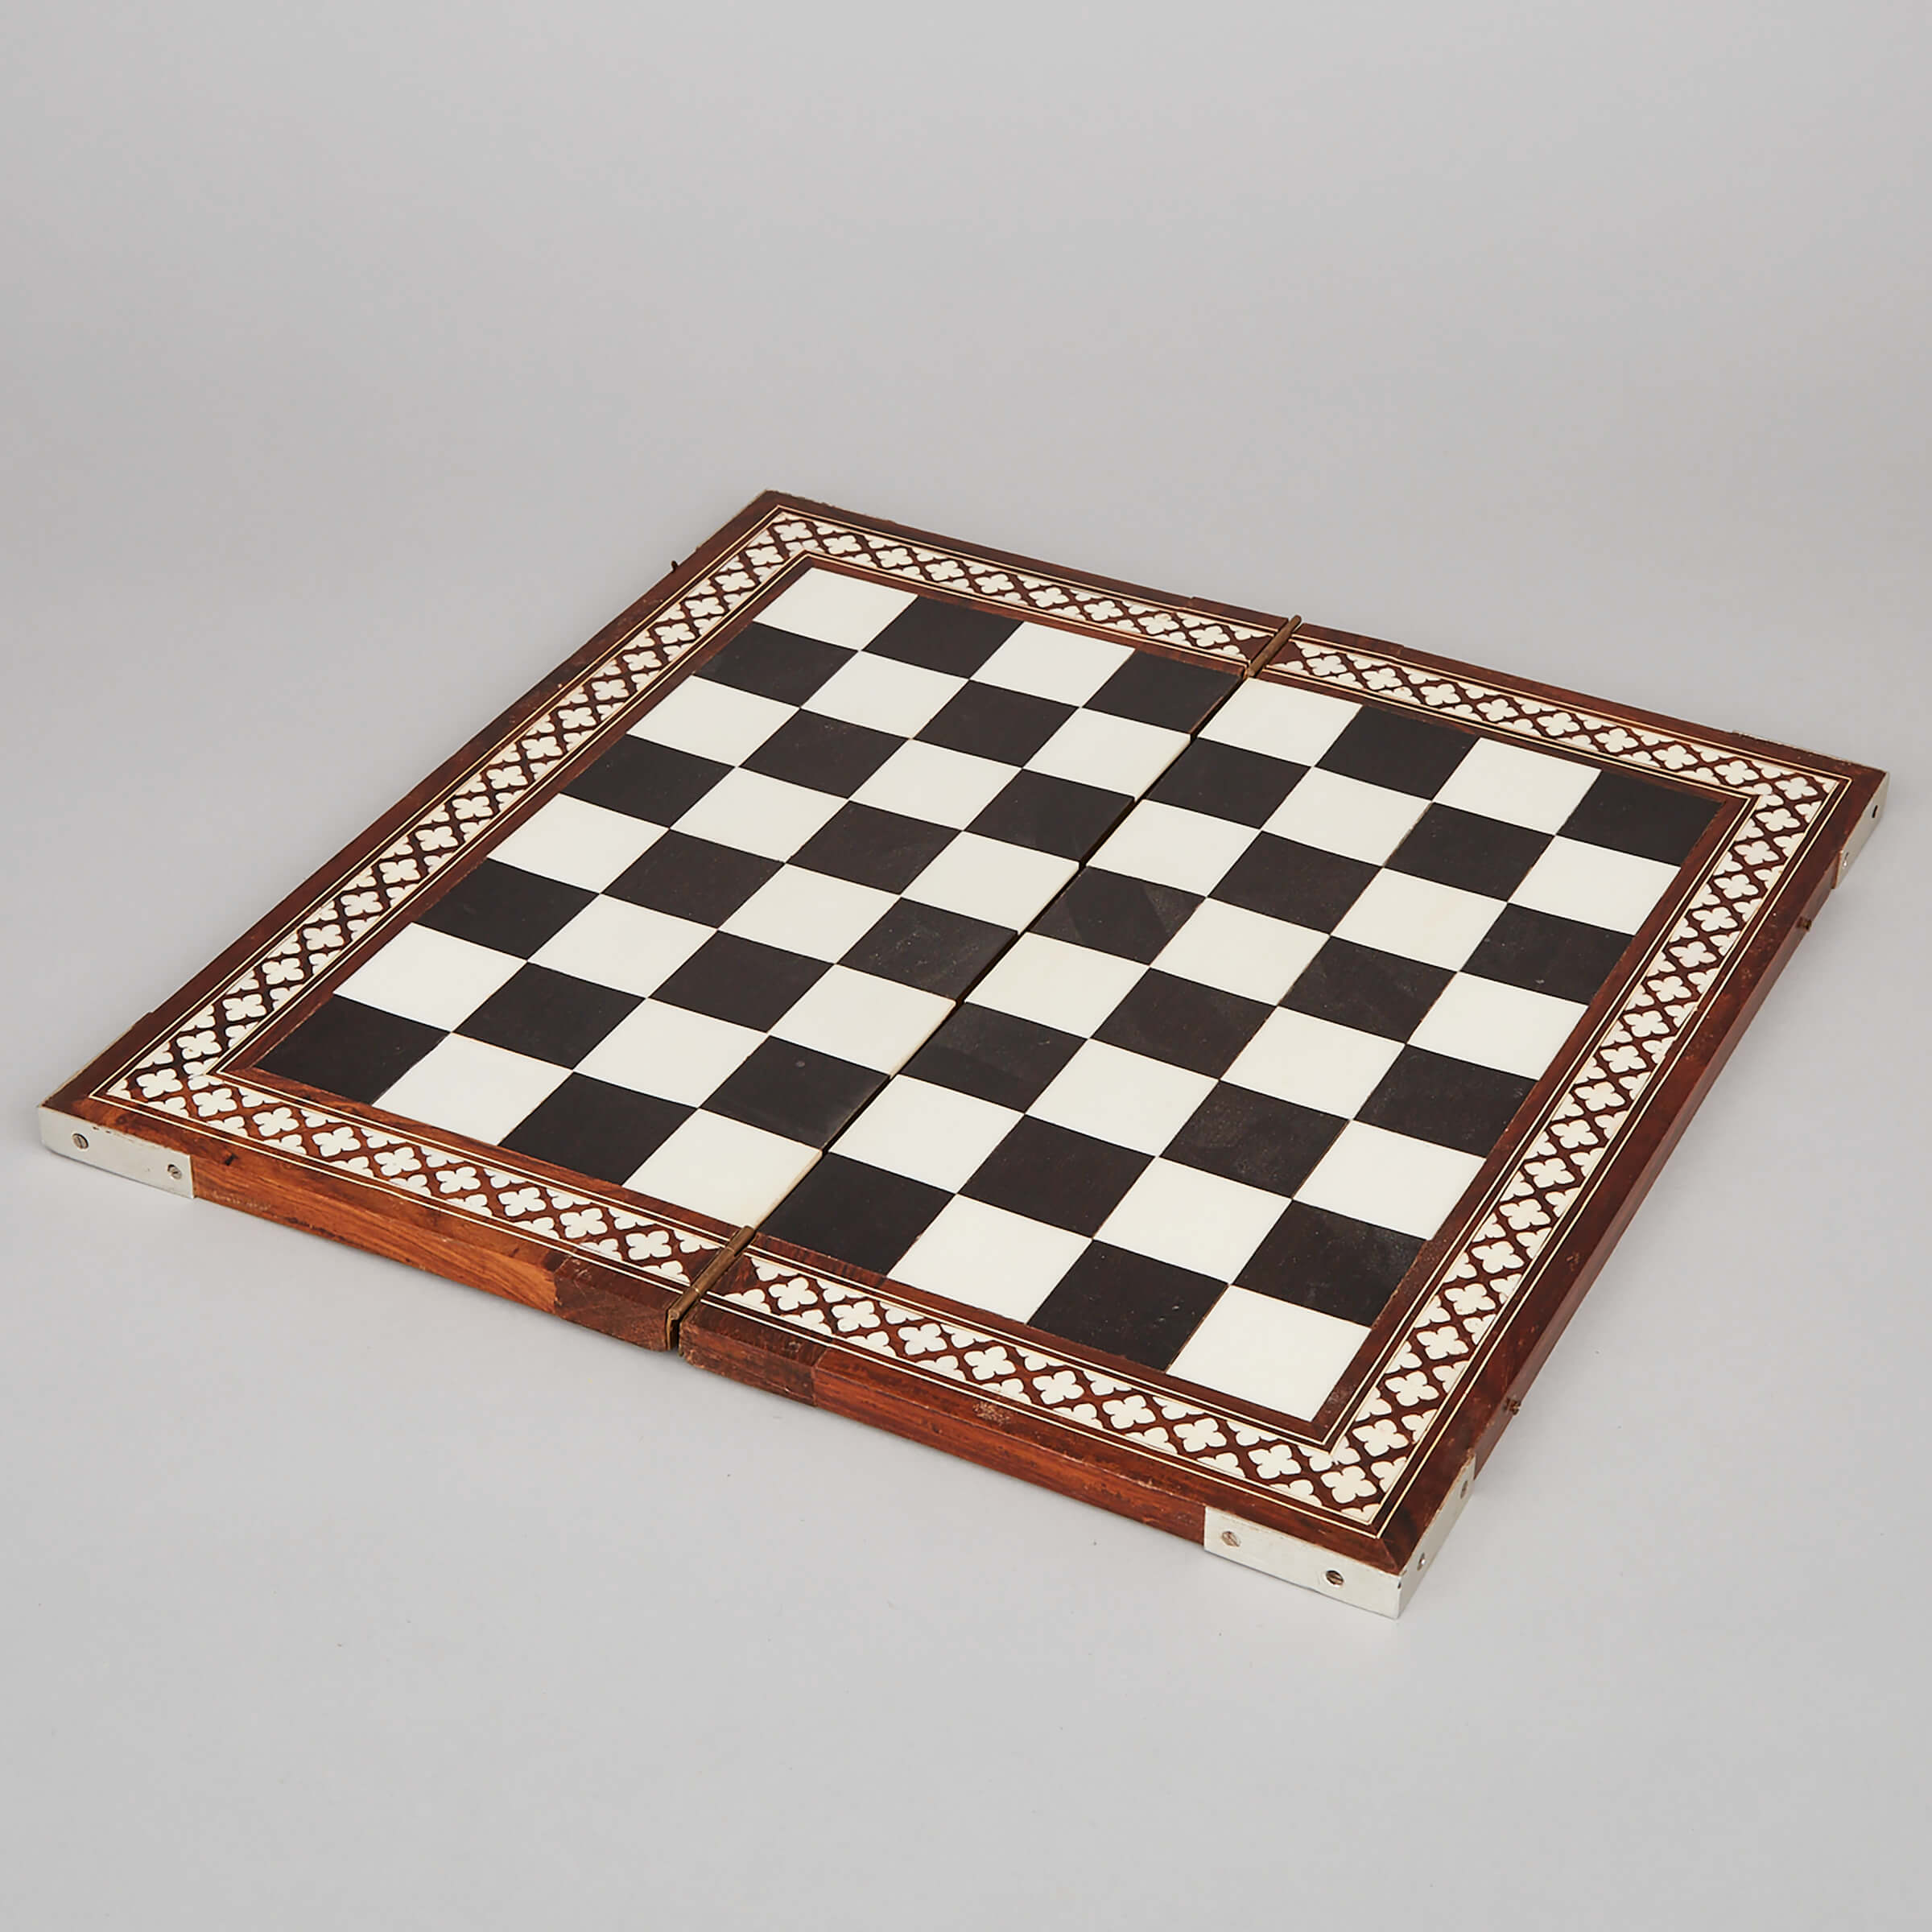 Middle Eastern Horn and Camel Bone Inlaid Hardwood Chess Board, mid 20th century